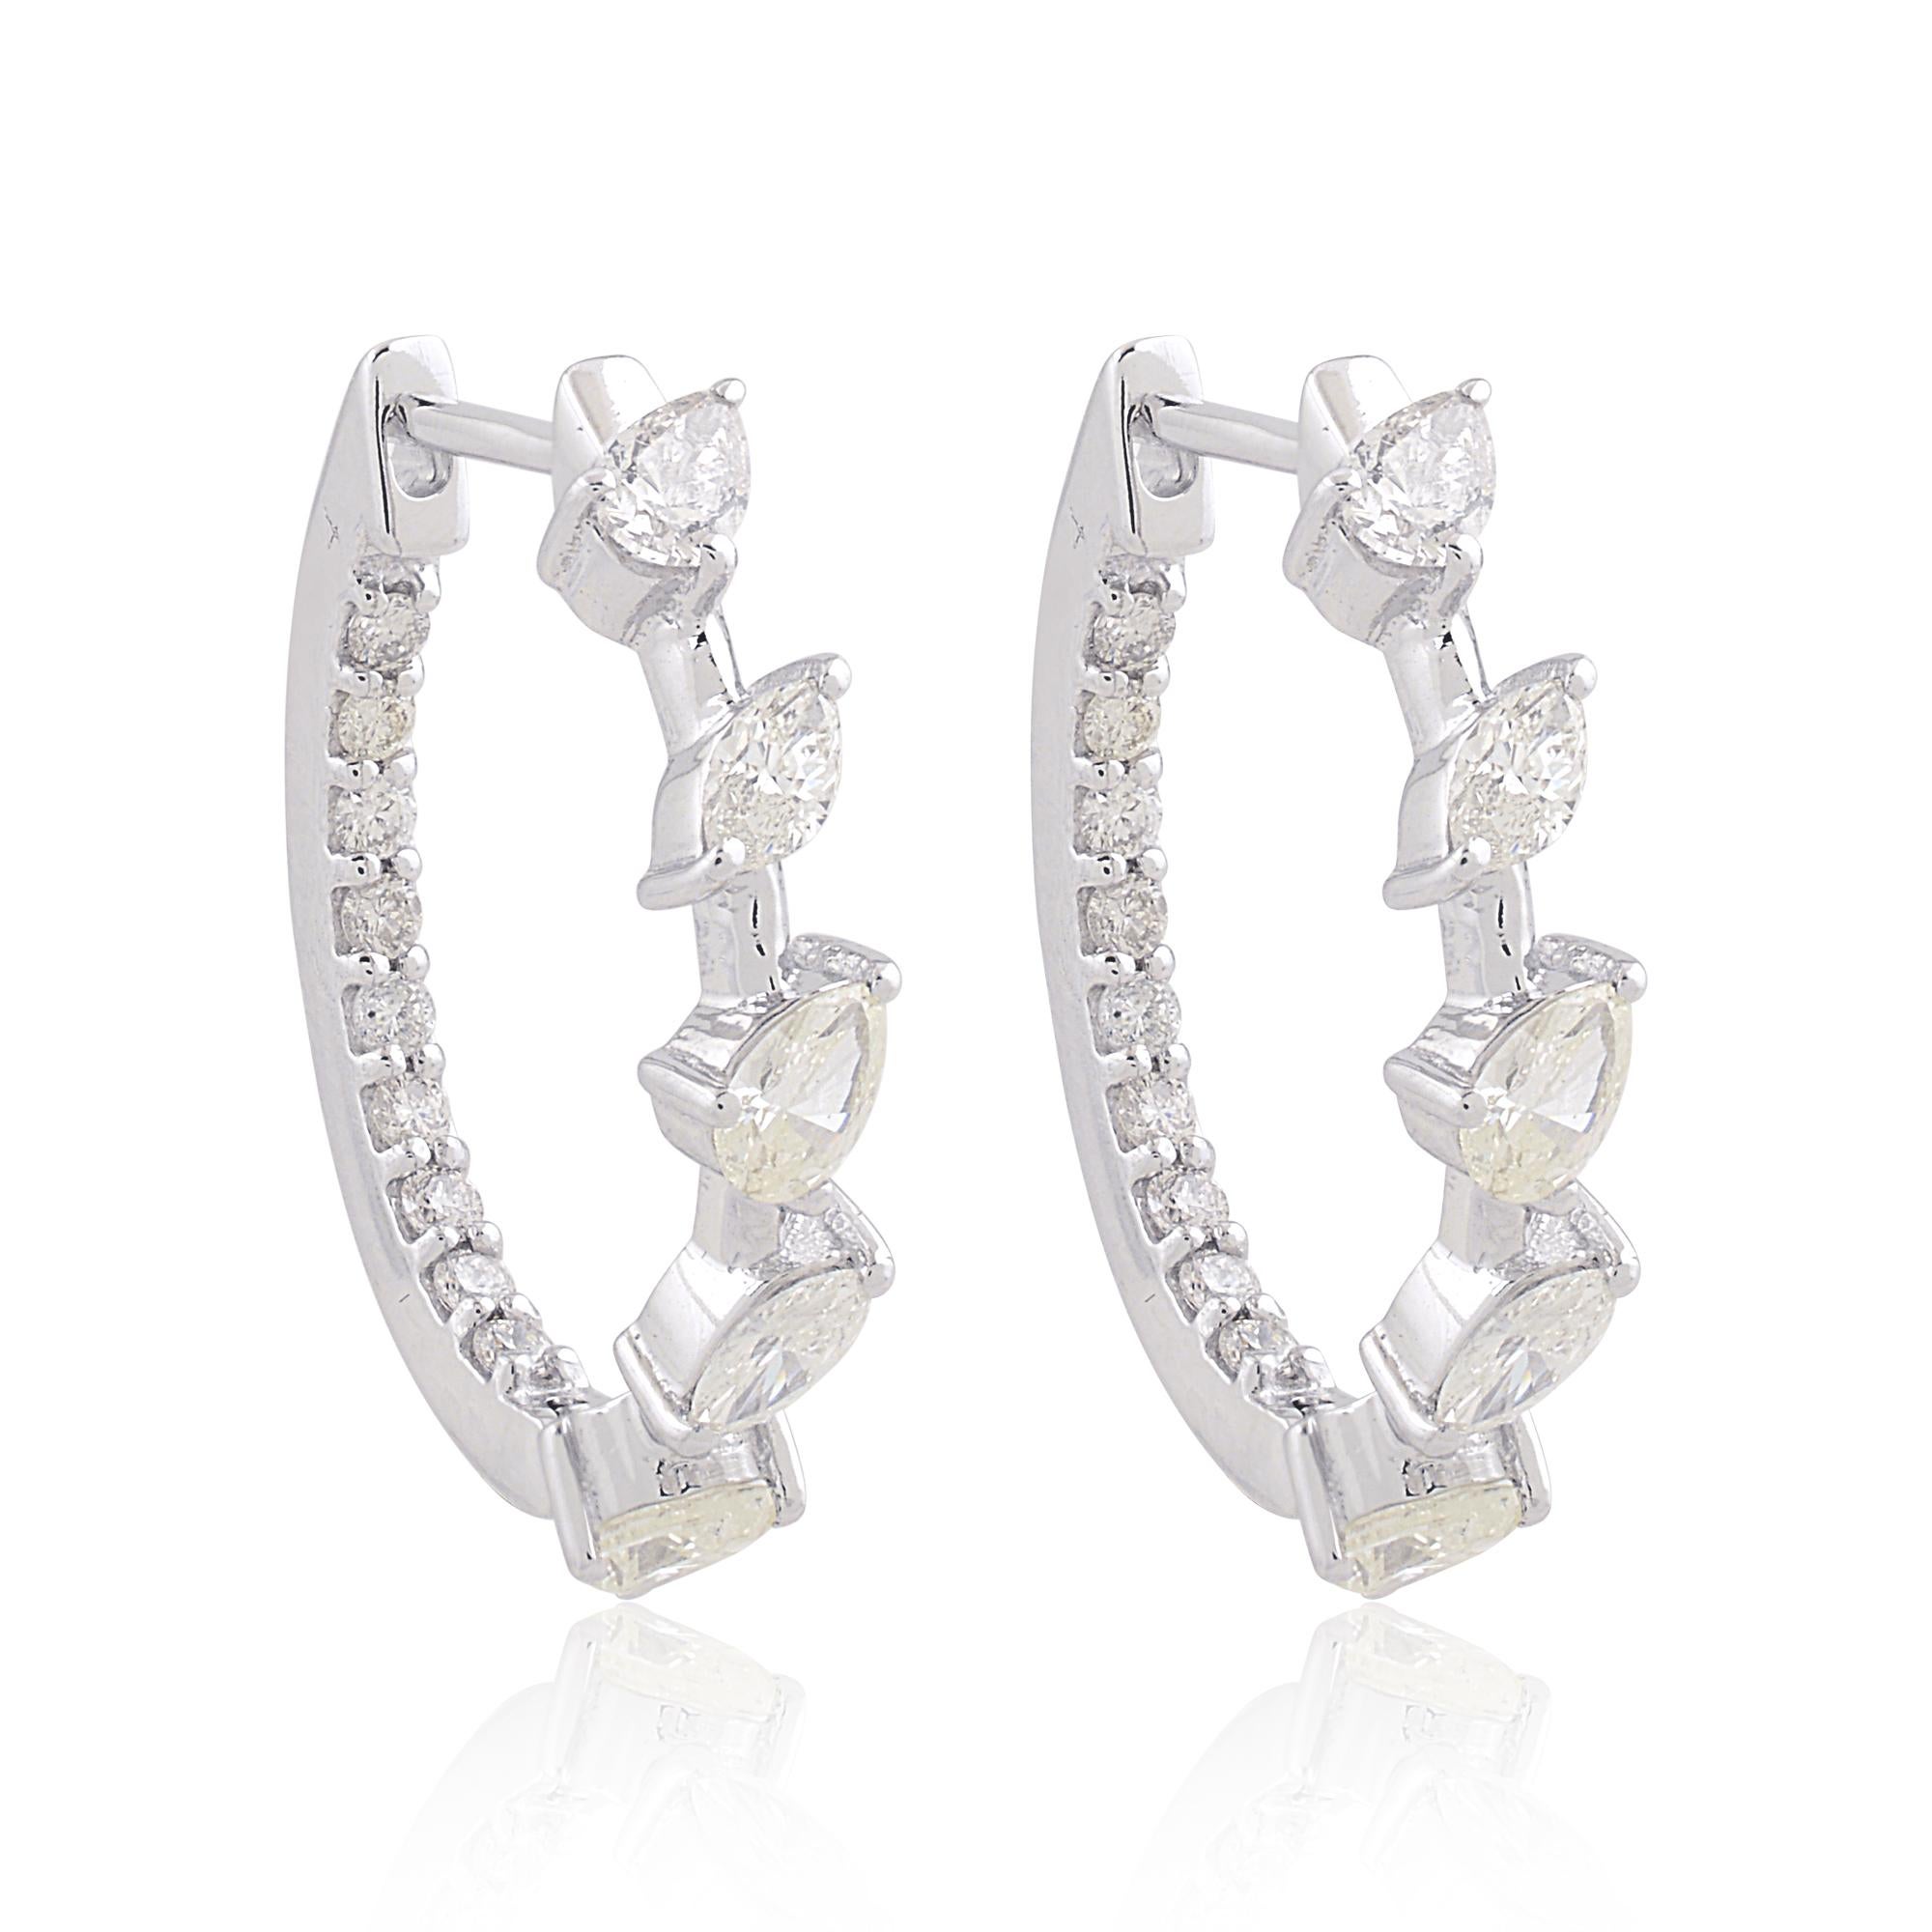 Crafted with precision and care, these huggies hoop earrings feature a solid 10k white gold construction, adding a touch of luxury and sophistication to the design. The huggie style closure ensures a secure and comfortable fit, allowing the earrings